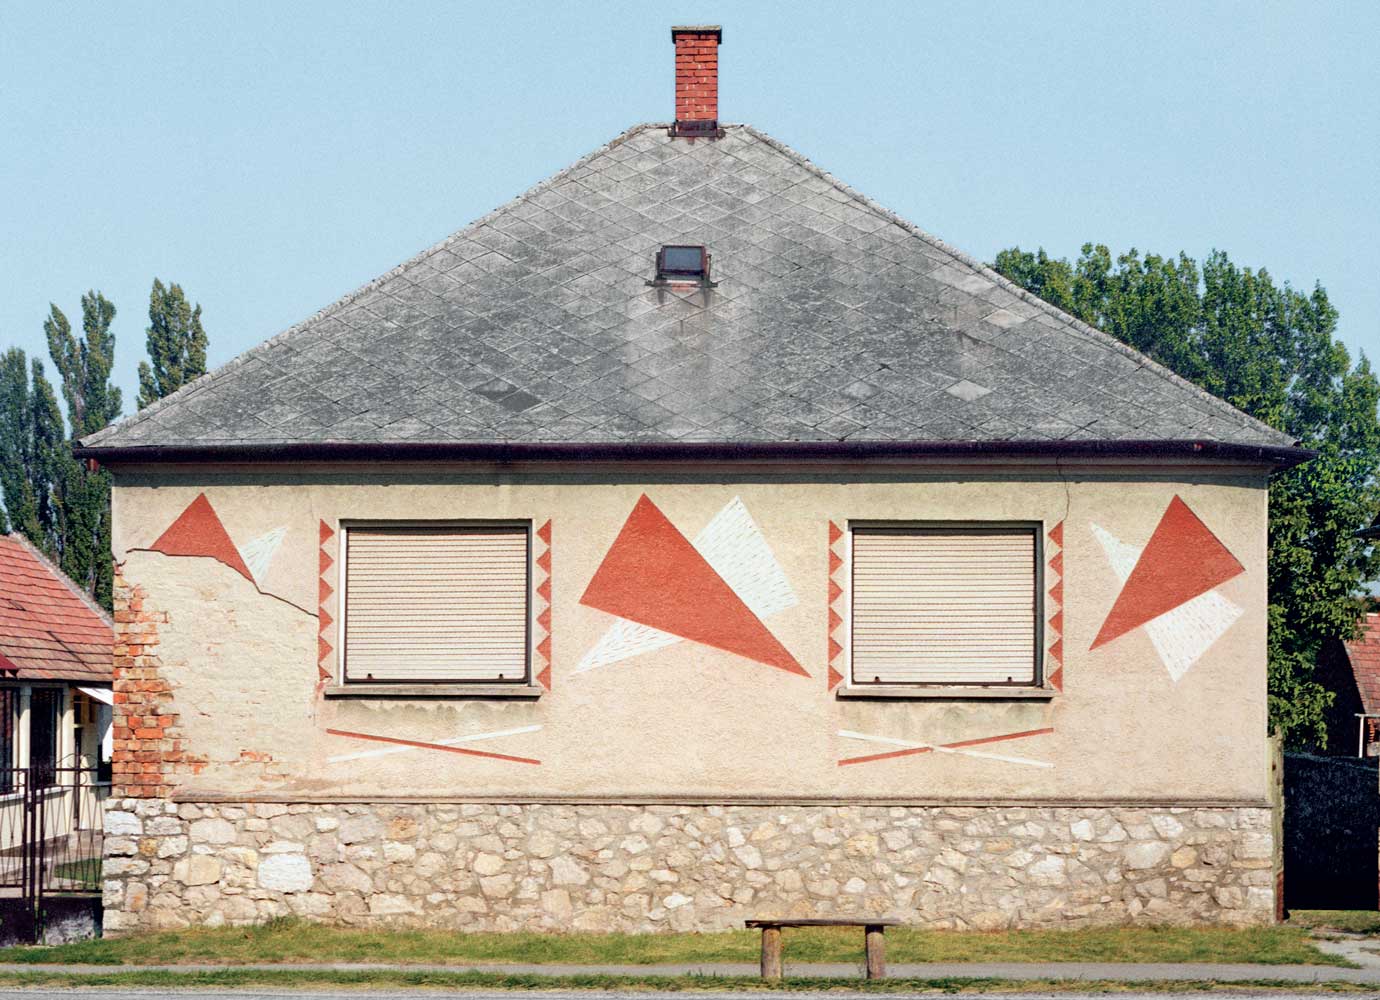 The Kádár cube comeback: how the humble Hungarian home inspired high-fashion and eco-friendly living